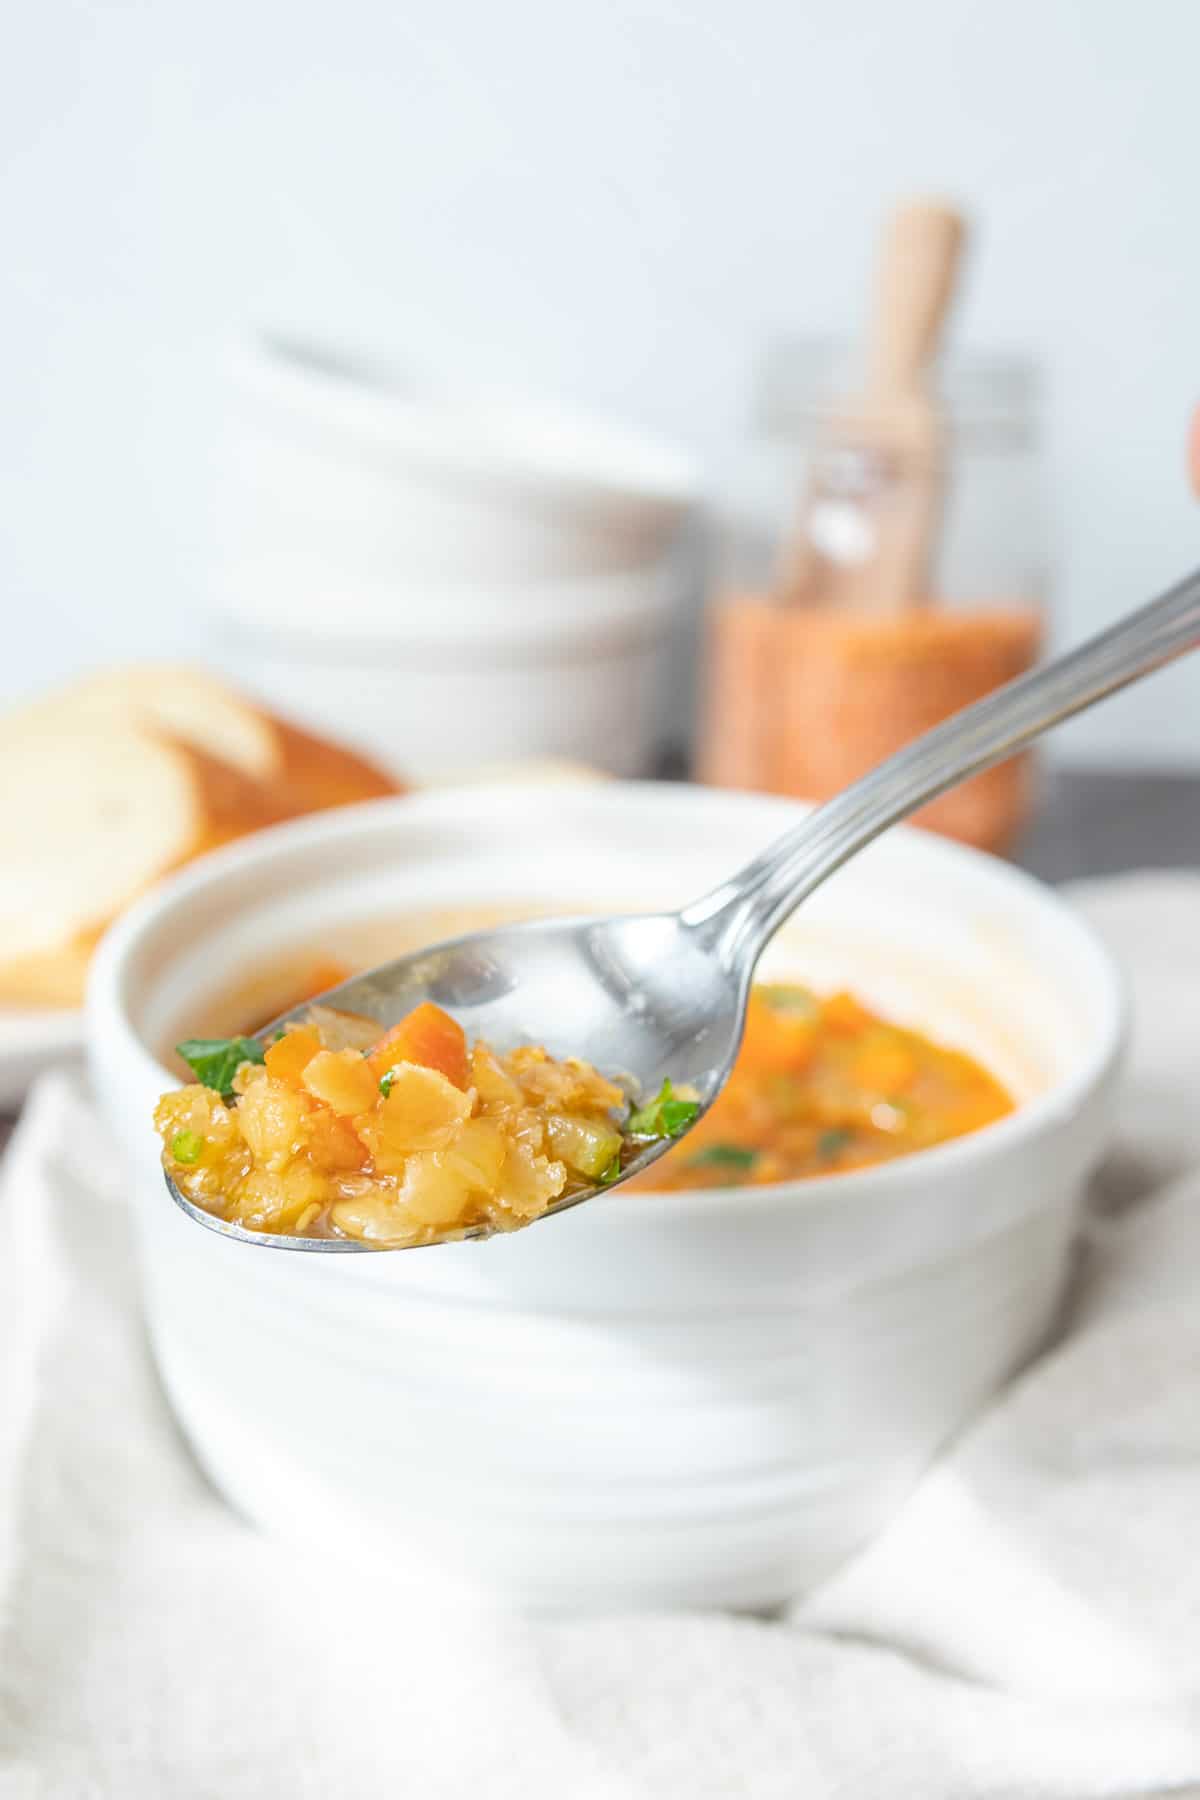 Spoonful of red lentil soup.